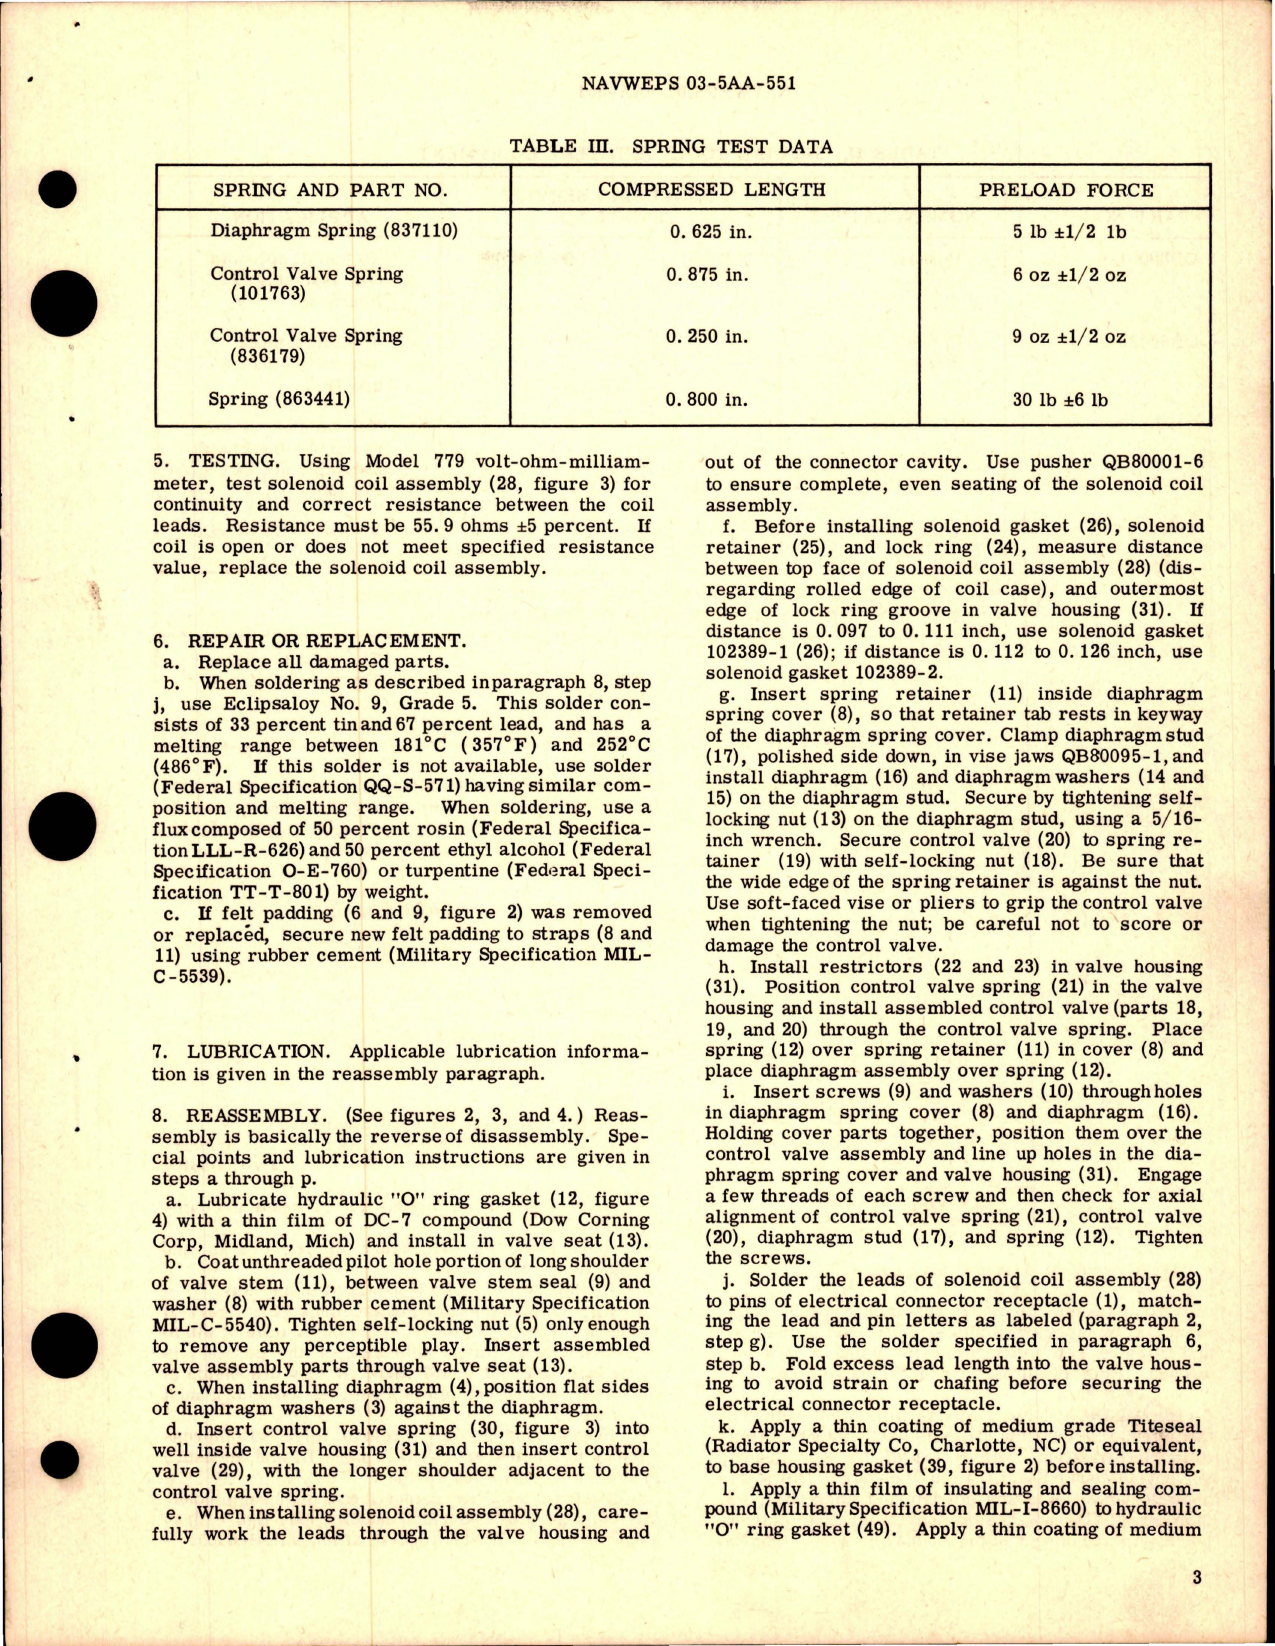 Sample page 5 from AirCorps Library document: Overhaul Instructions with Parts for Oil Separator Assembly - Part 1545-9-E and 1545-16-E 